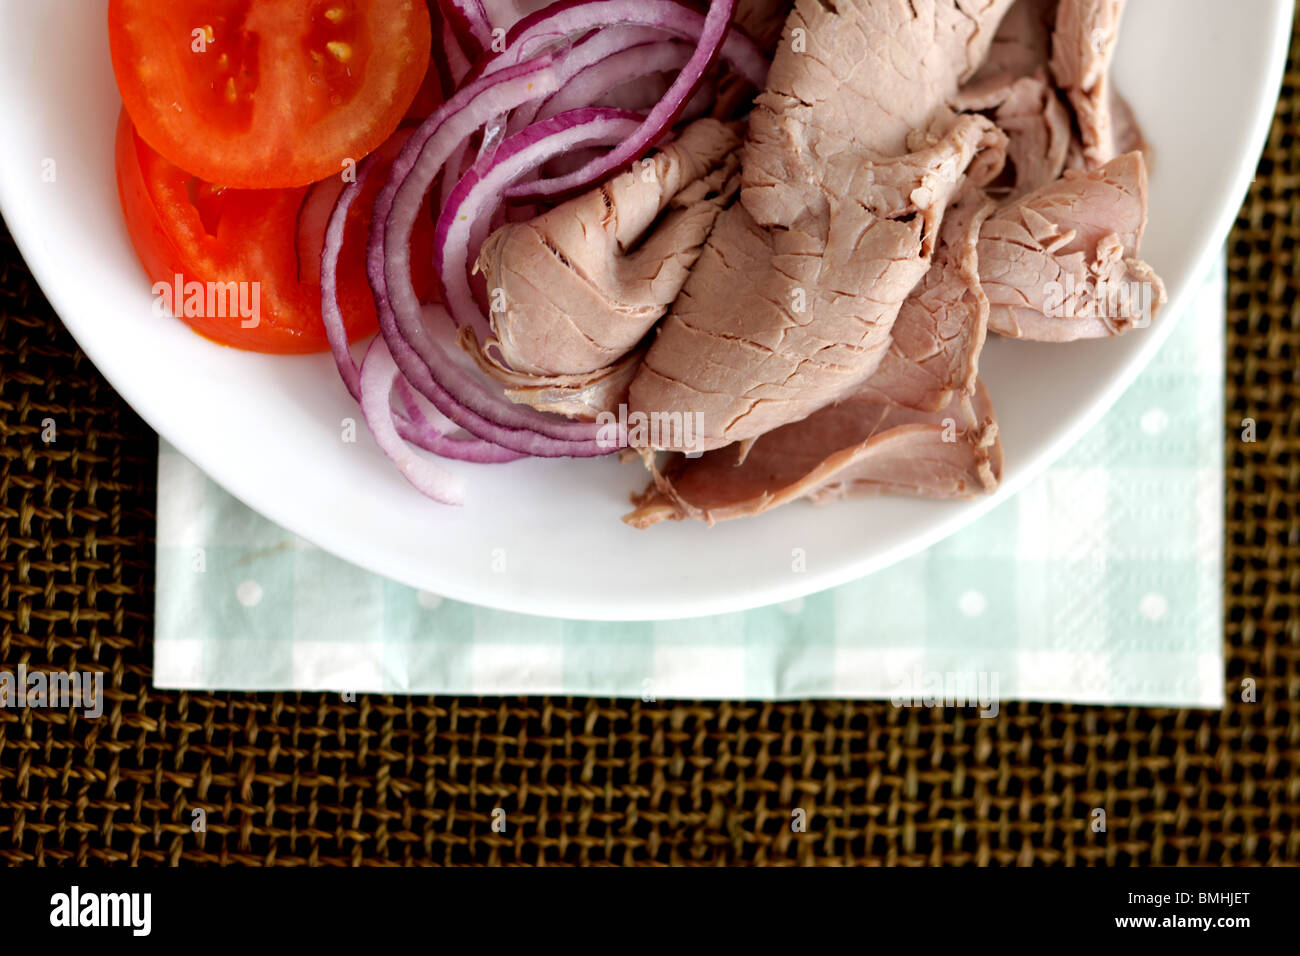 Fresh Cold Roast Beef Salad With No people And A Clipping Path Stock Photo